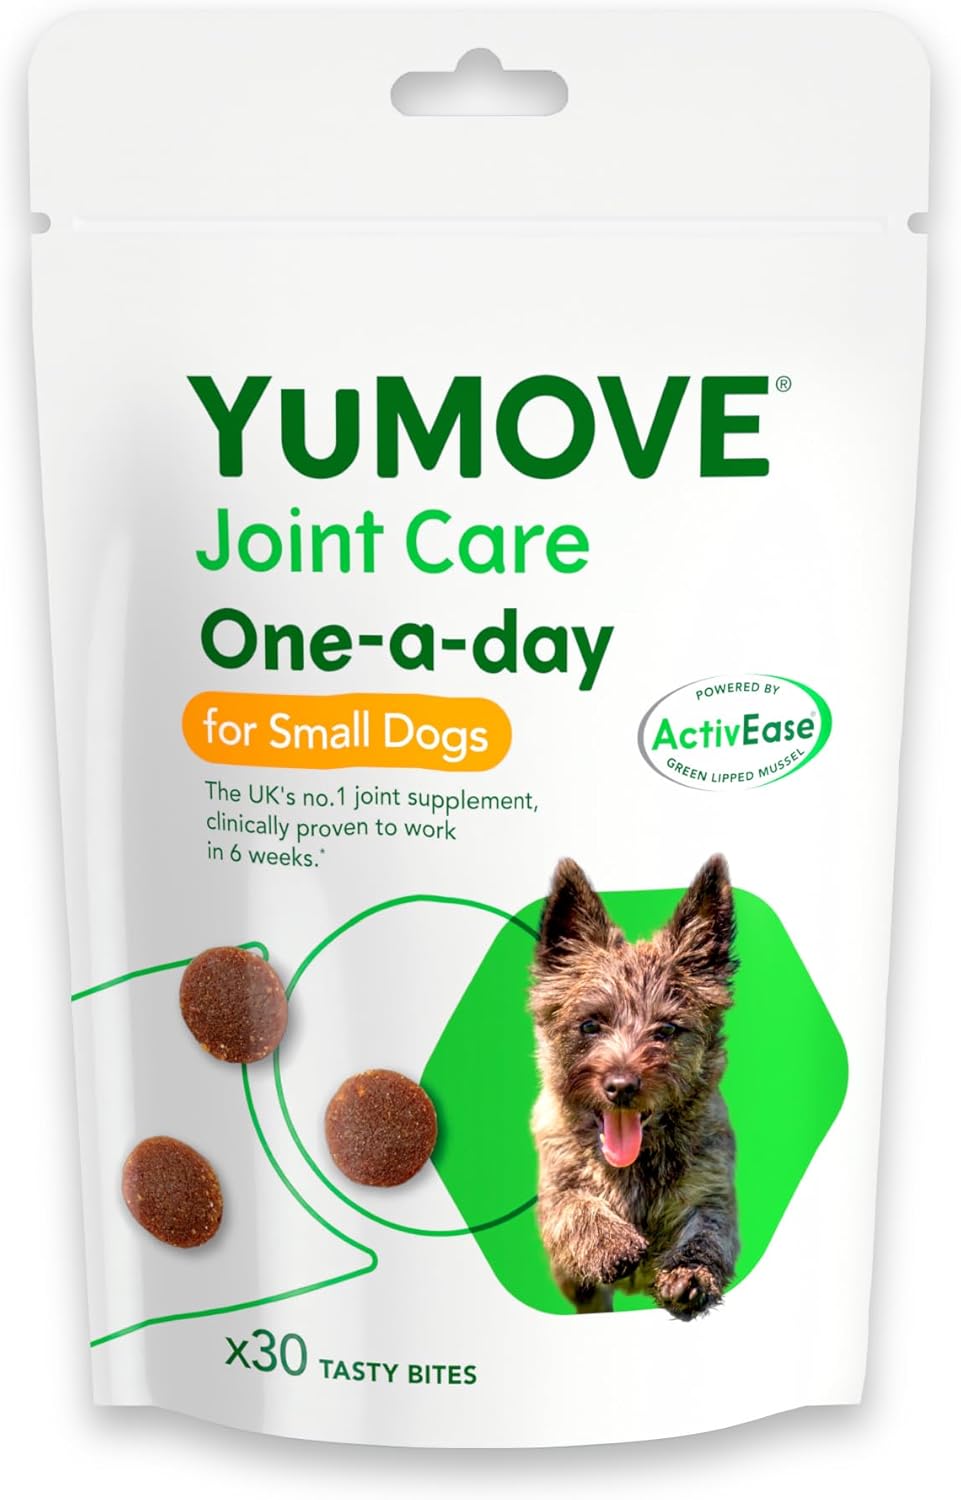 YuMOVE ONE-A-DAY Chews For Small Dogs | Joint Supplement for Stiff Dogs with Glucosamine, Chondroitin, Green Lipped Mussel | 30 Chews - 1 Month supply?YMCS30